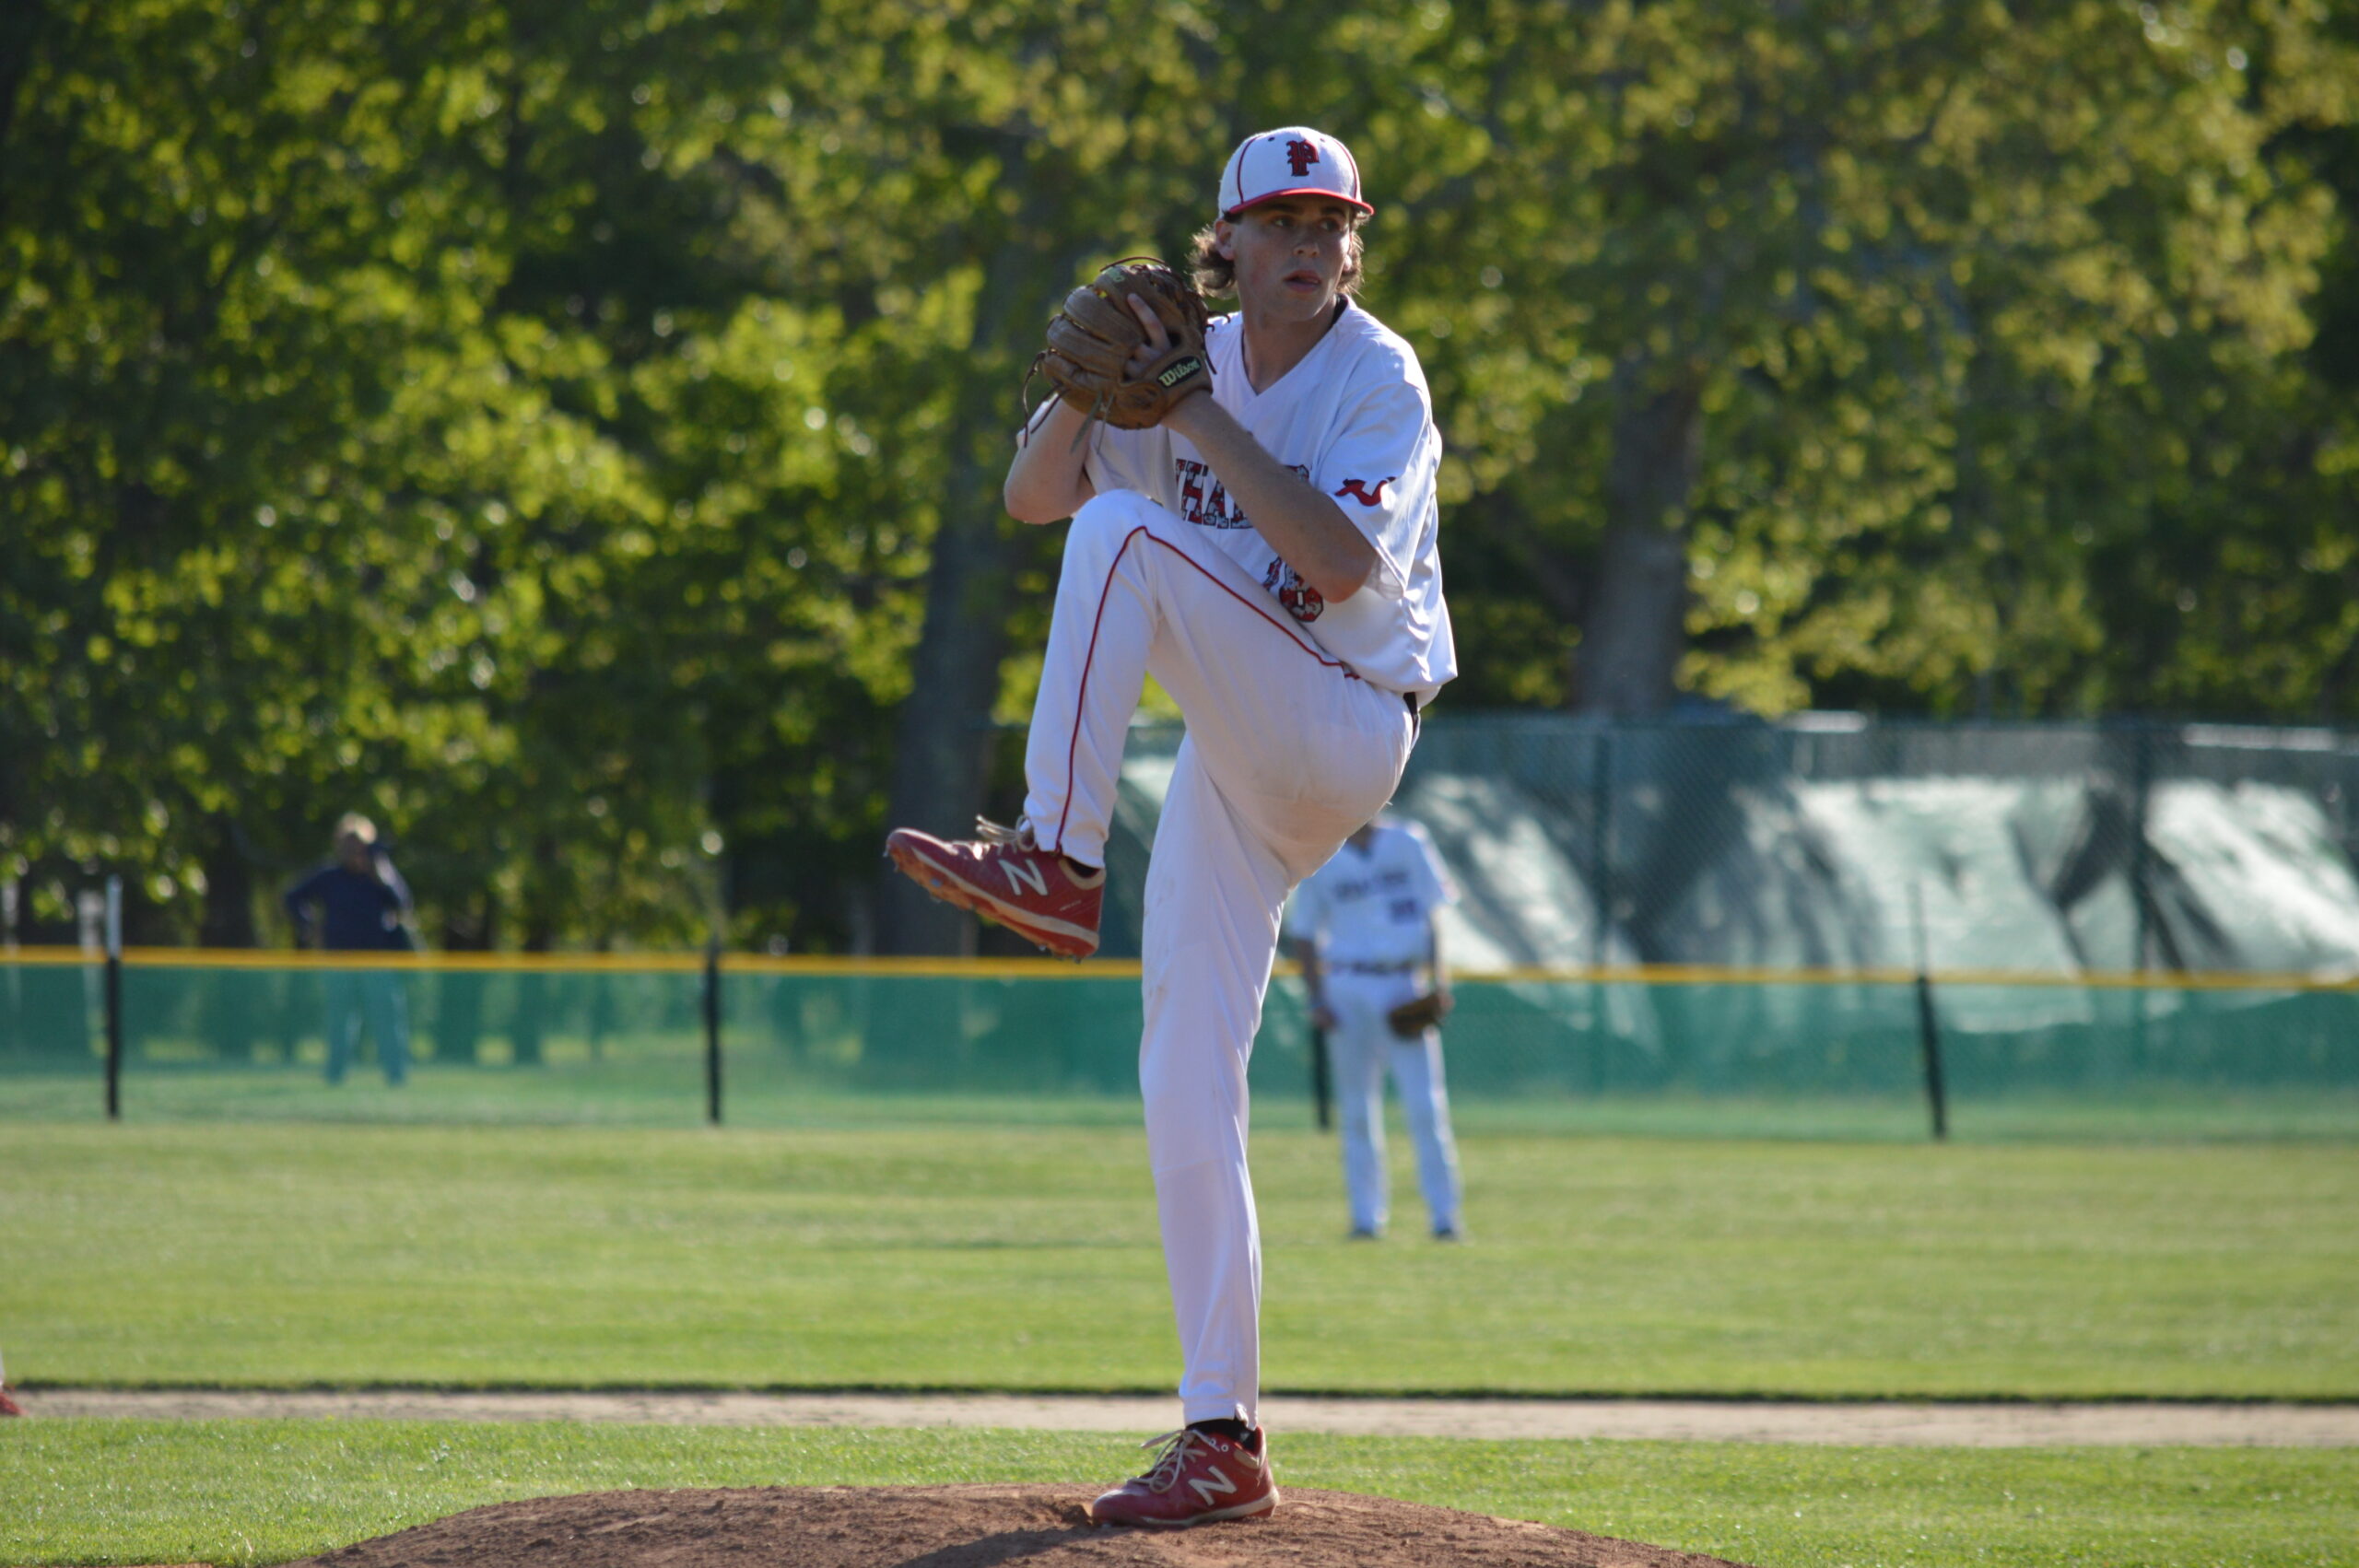 Pierson senior Dan Labrozzi pitched a complete-game 2-1 victory on Tuesday at Mashashimuet Park to help keep the Whalers’ season alive.